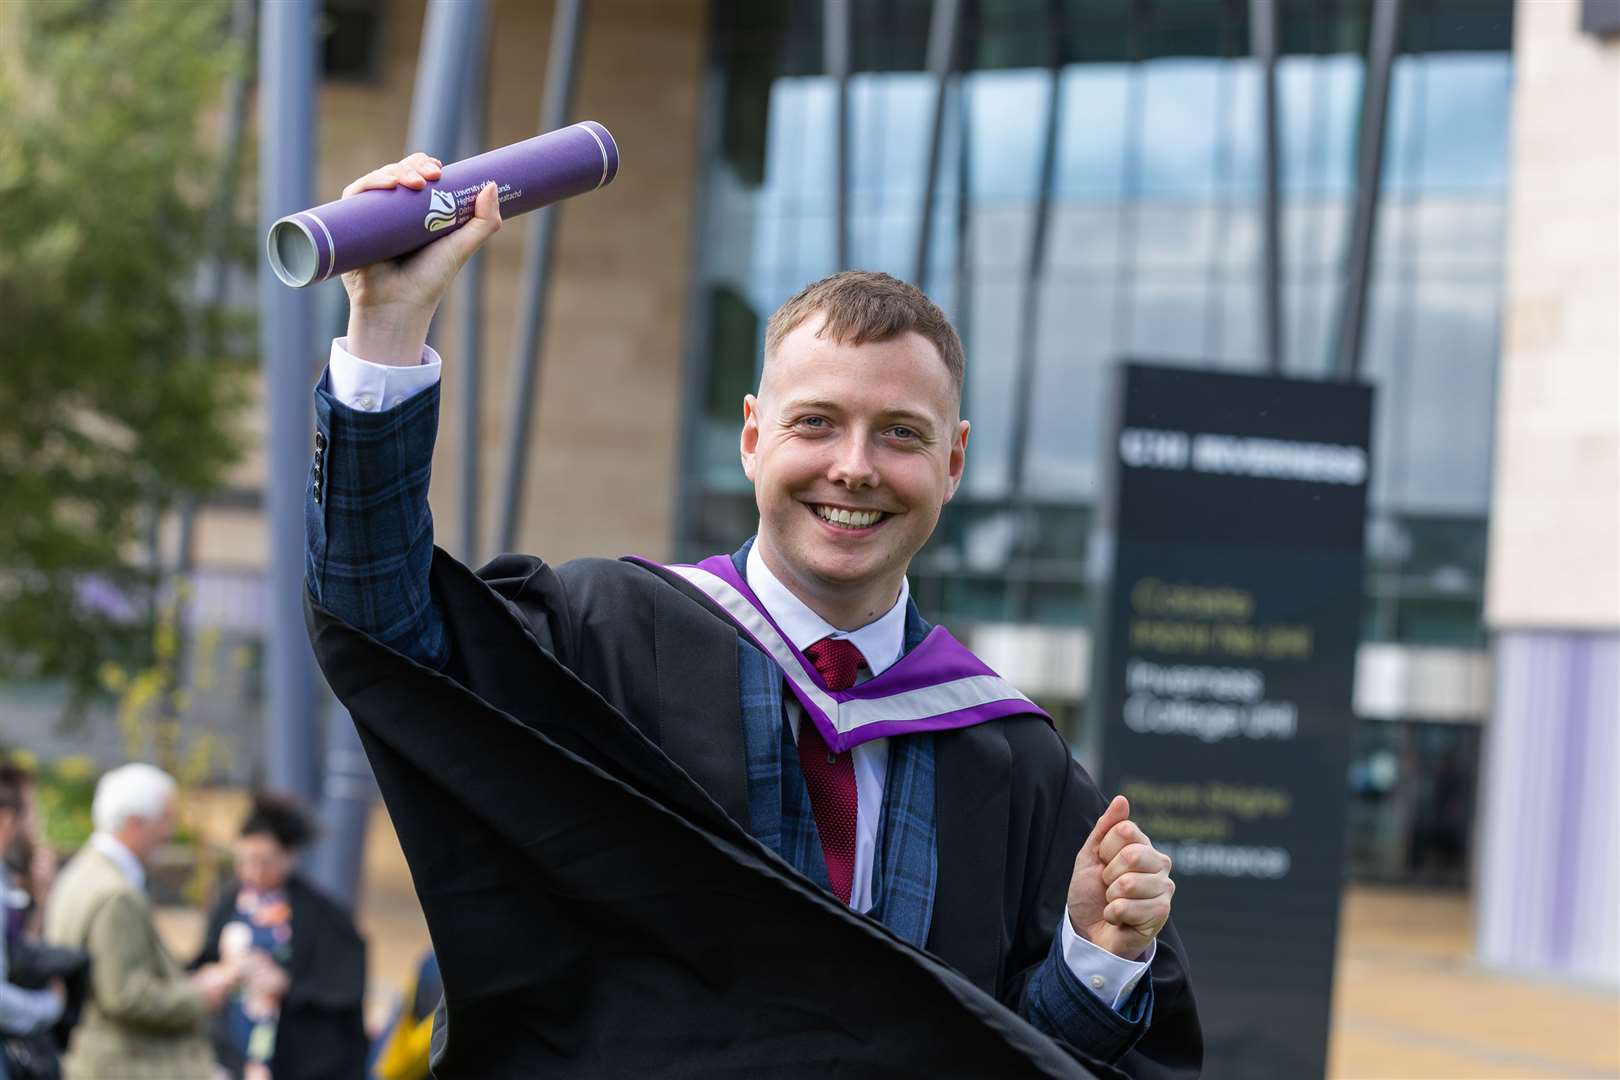 George Gunn of Brora graduated BSc (Hons) Geography in 2020 and now works as a climate change strategy officer at Moray Council.